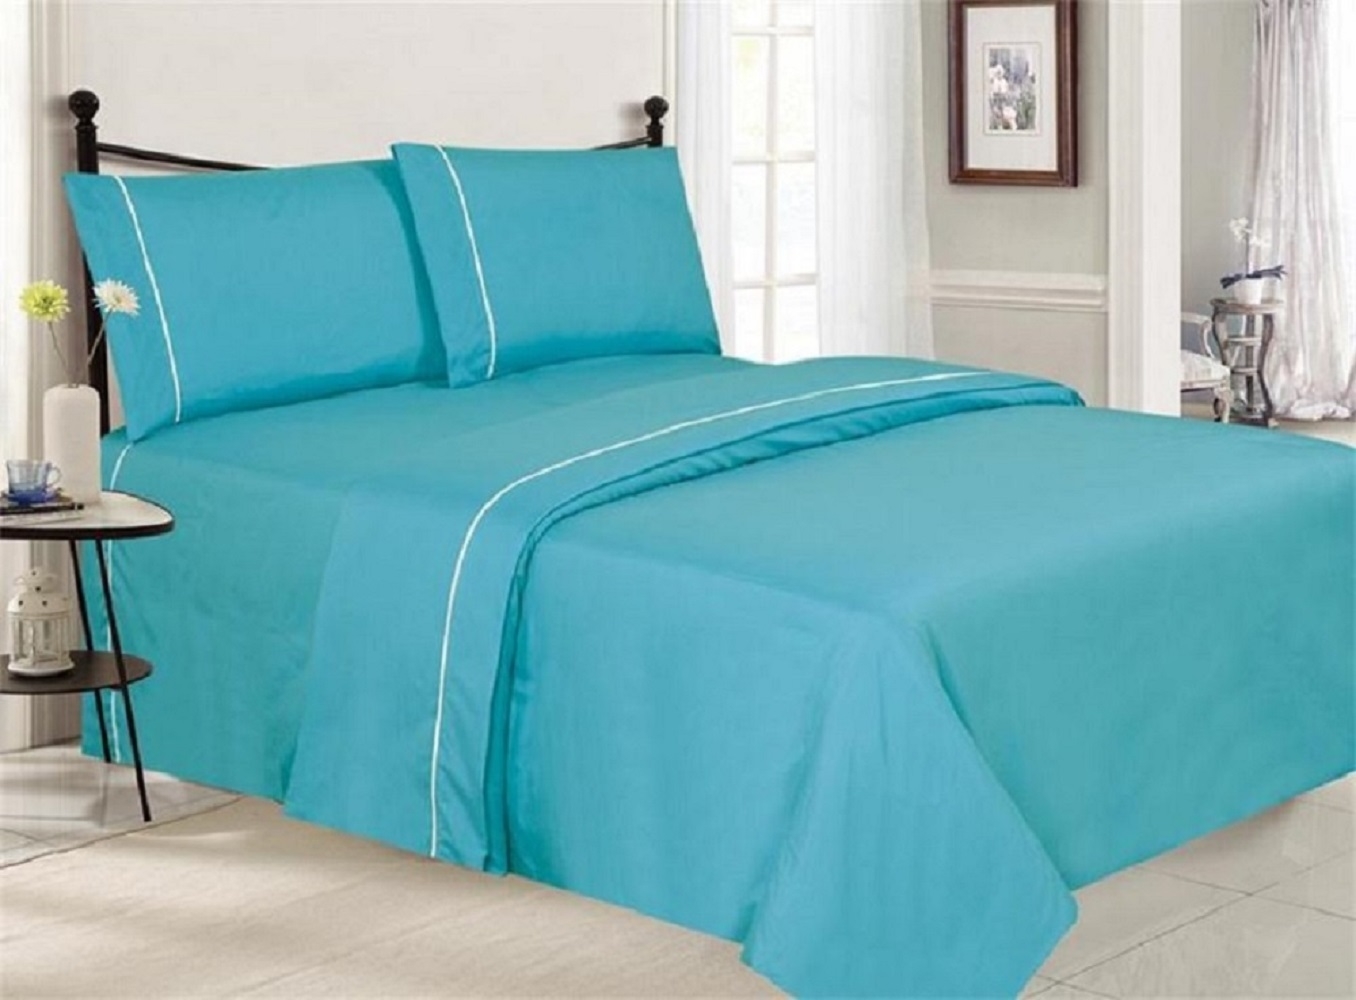 4-piece Set: Wrinkle Free Ultra-luxe Double-brushed 1800 Series Sheets - Aqua, King